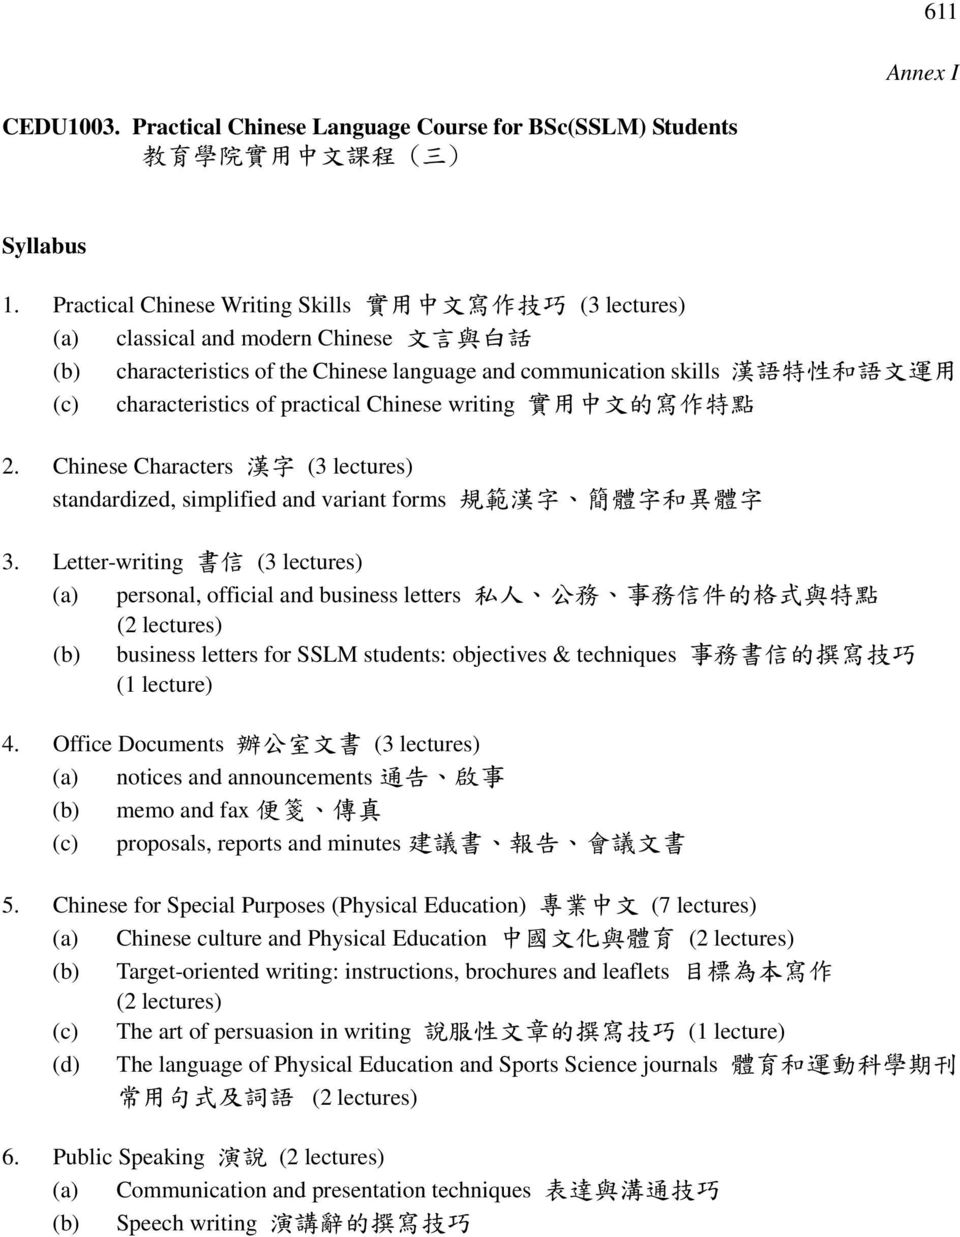 characteristics of practical Chinese writing 實 用 中 文 的 寫 作 特 點 2. Chinese Characters 漢 字 (3 lectures) standardized, simplified and variant forms 規 範 漢 字 簡 體 字 和 異 體 字 3.